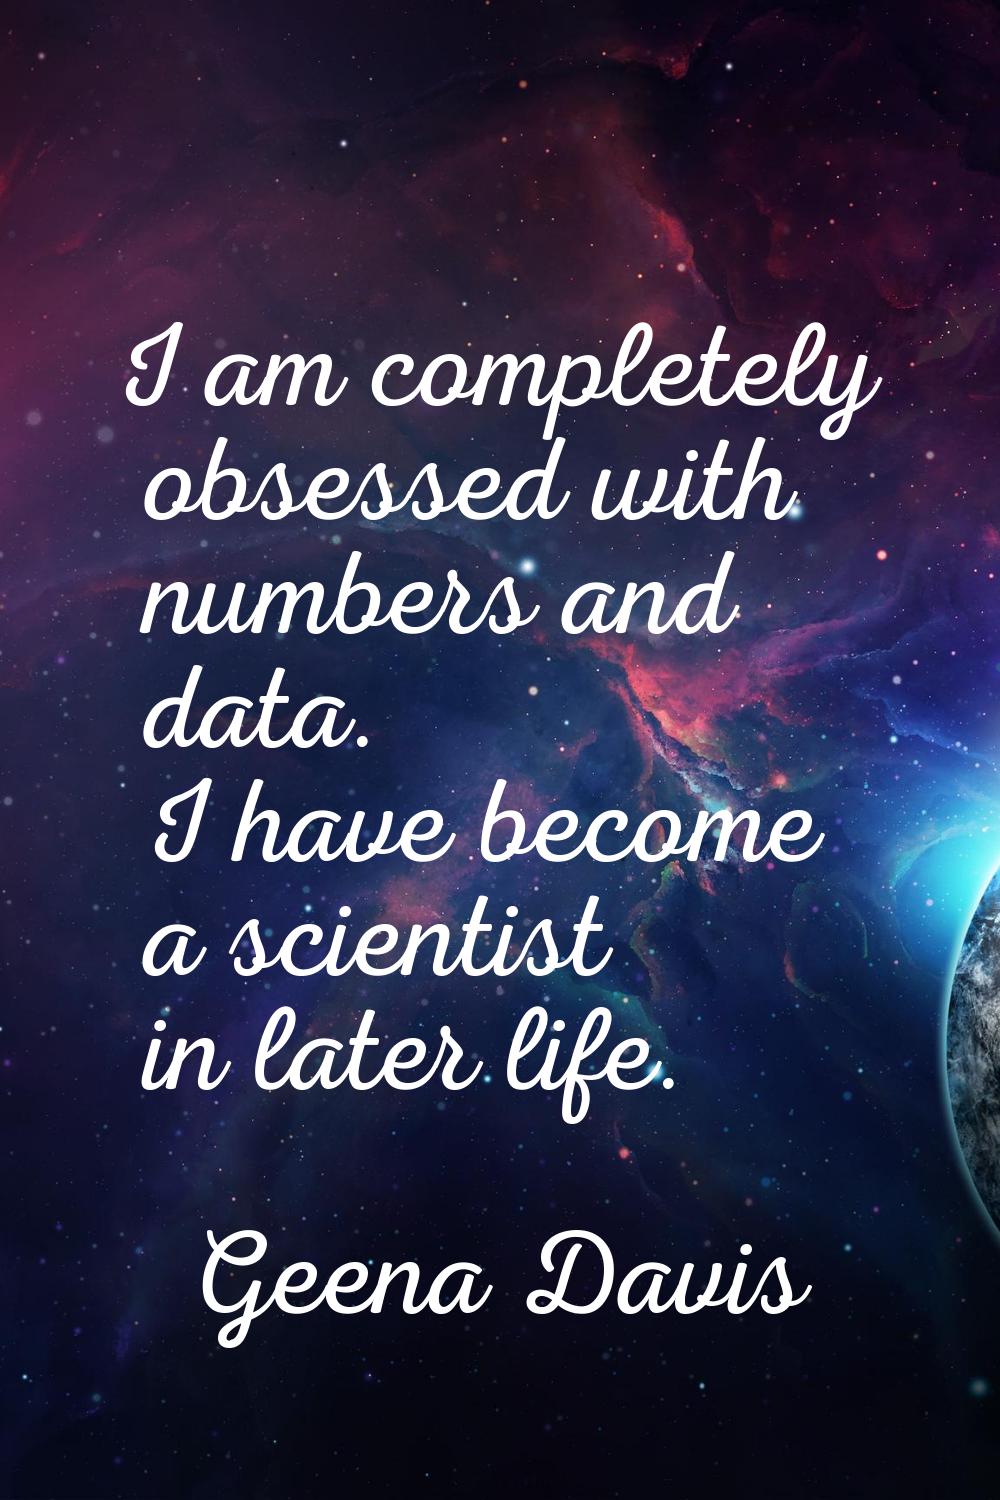 I am completely obsessed with numbers and data. I have become a scientist in later life.